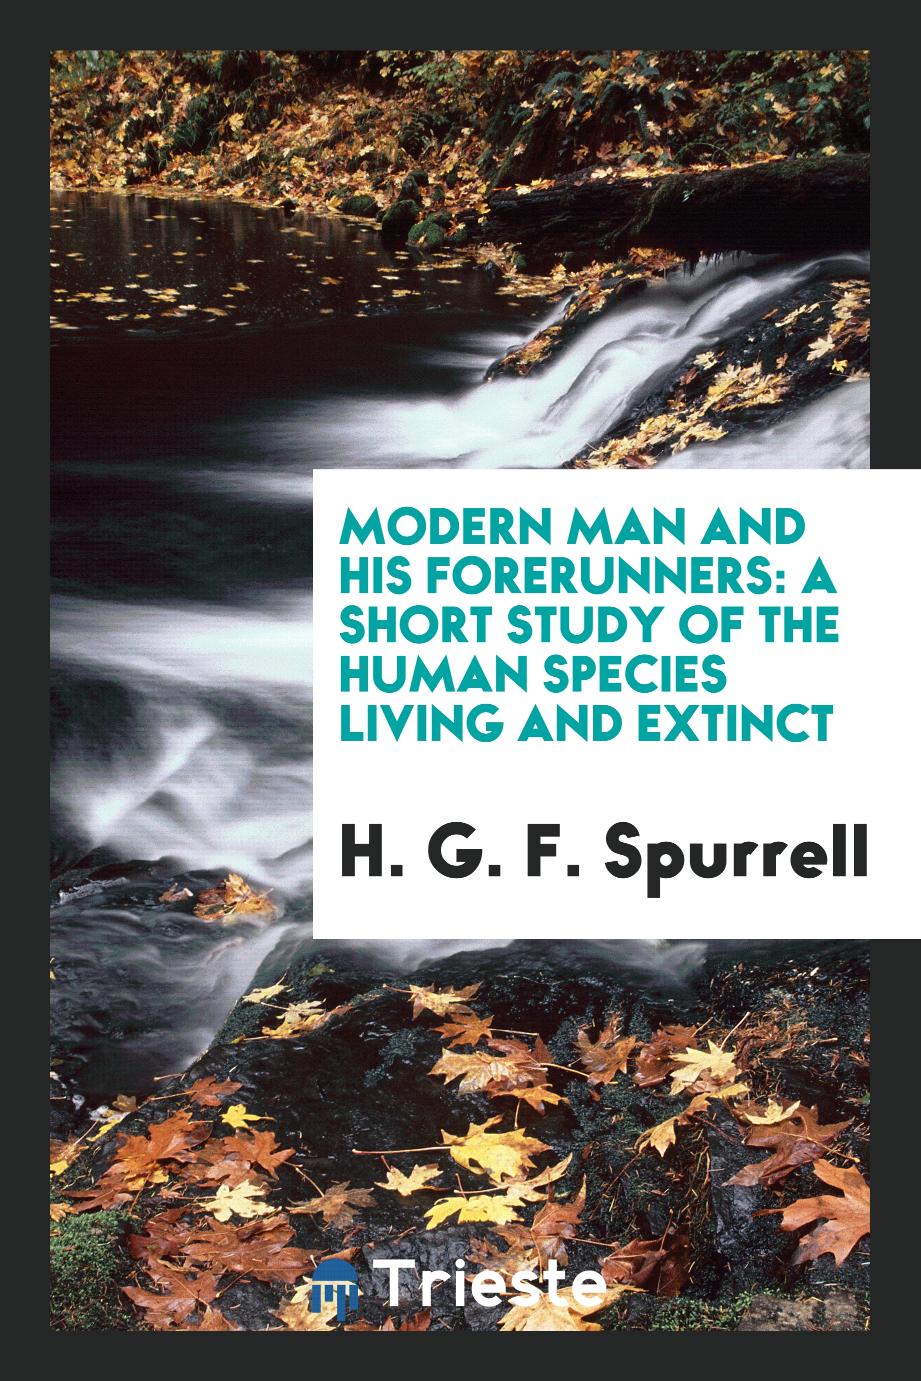 Modern man and his forerunners: a short study of the human species living and extinct